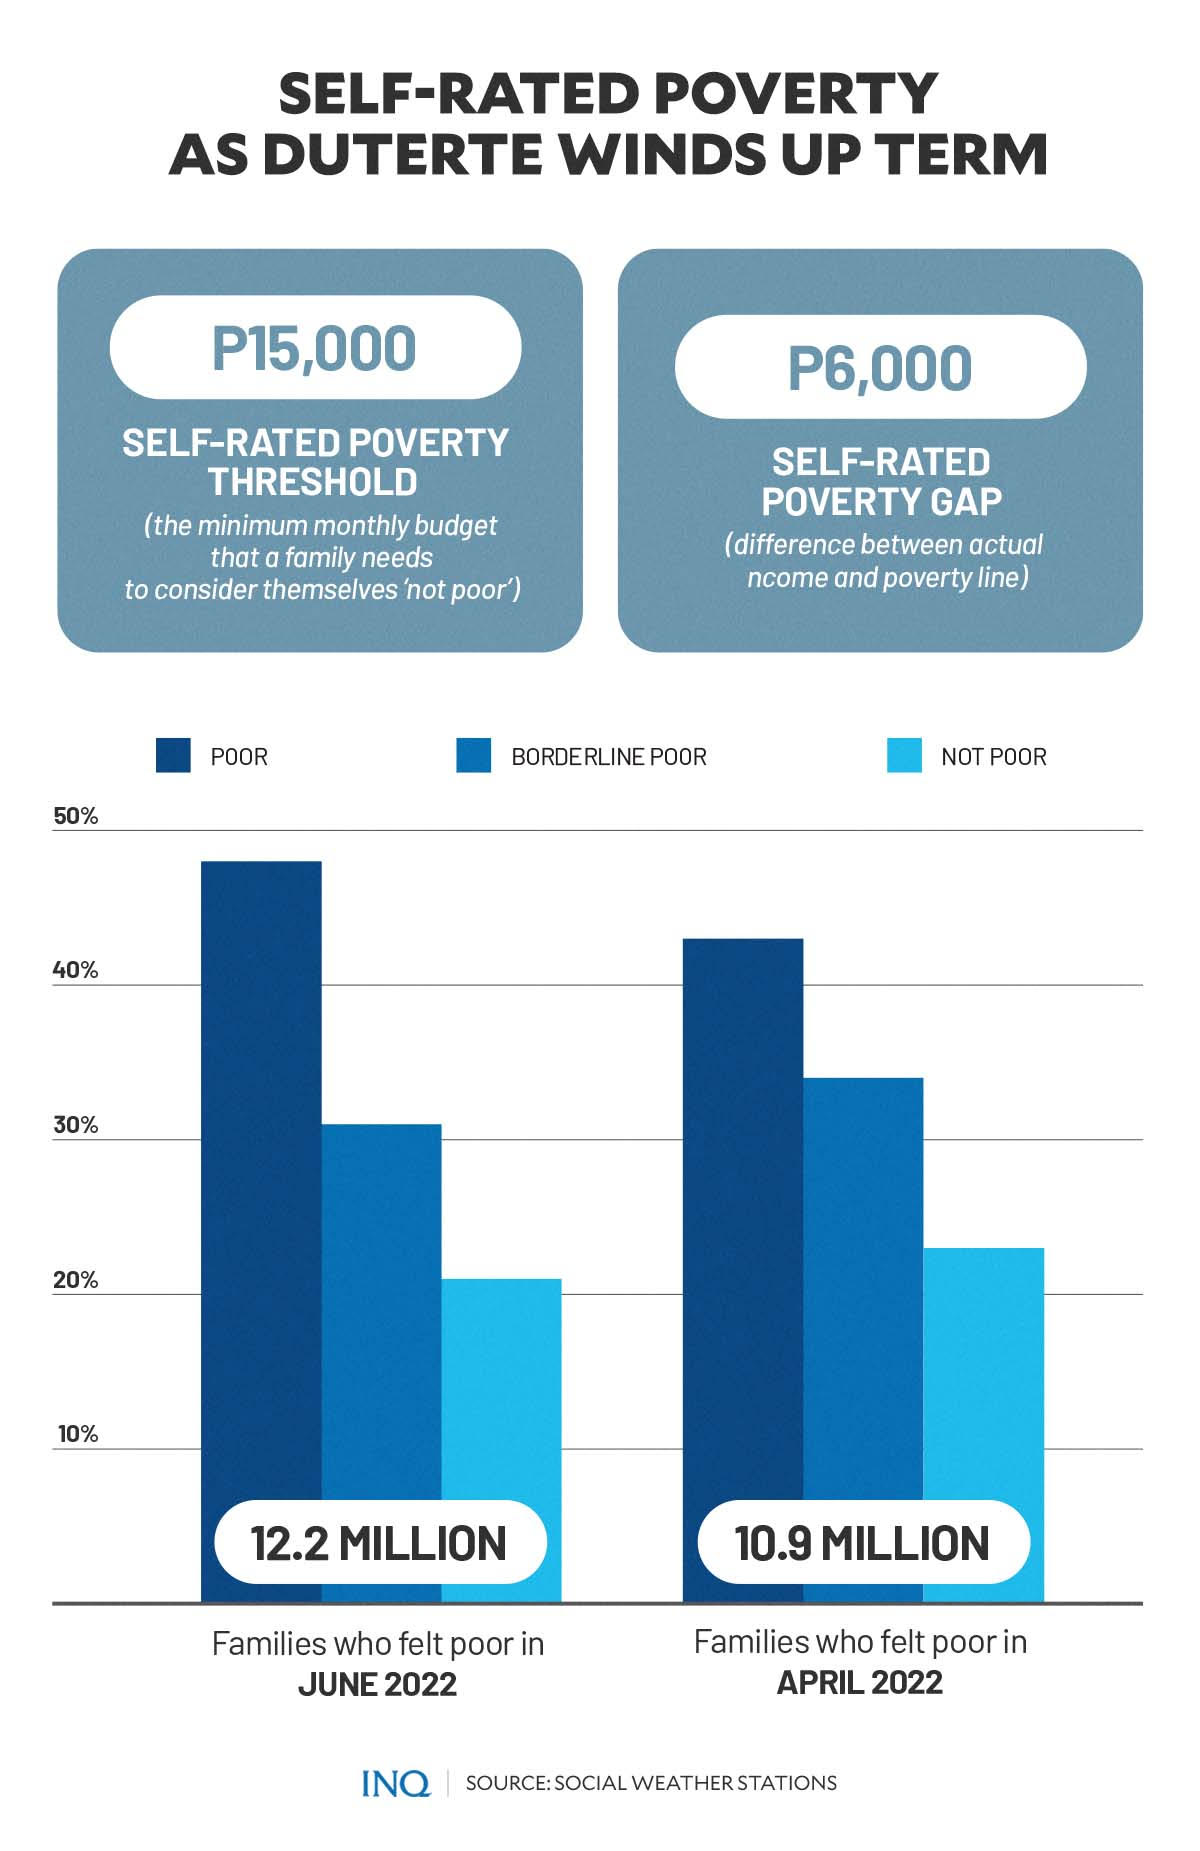 Self-rated poverty as Duterte winds up term